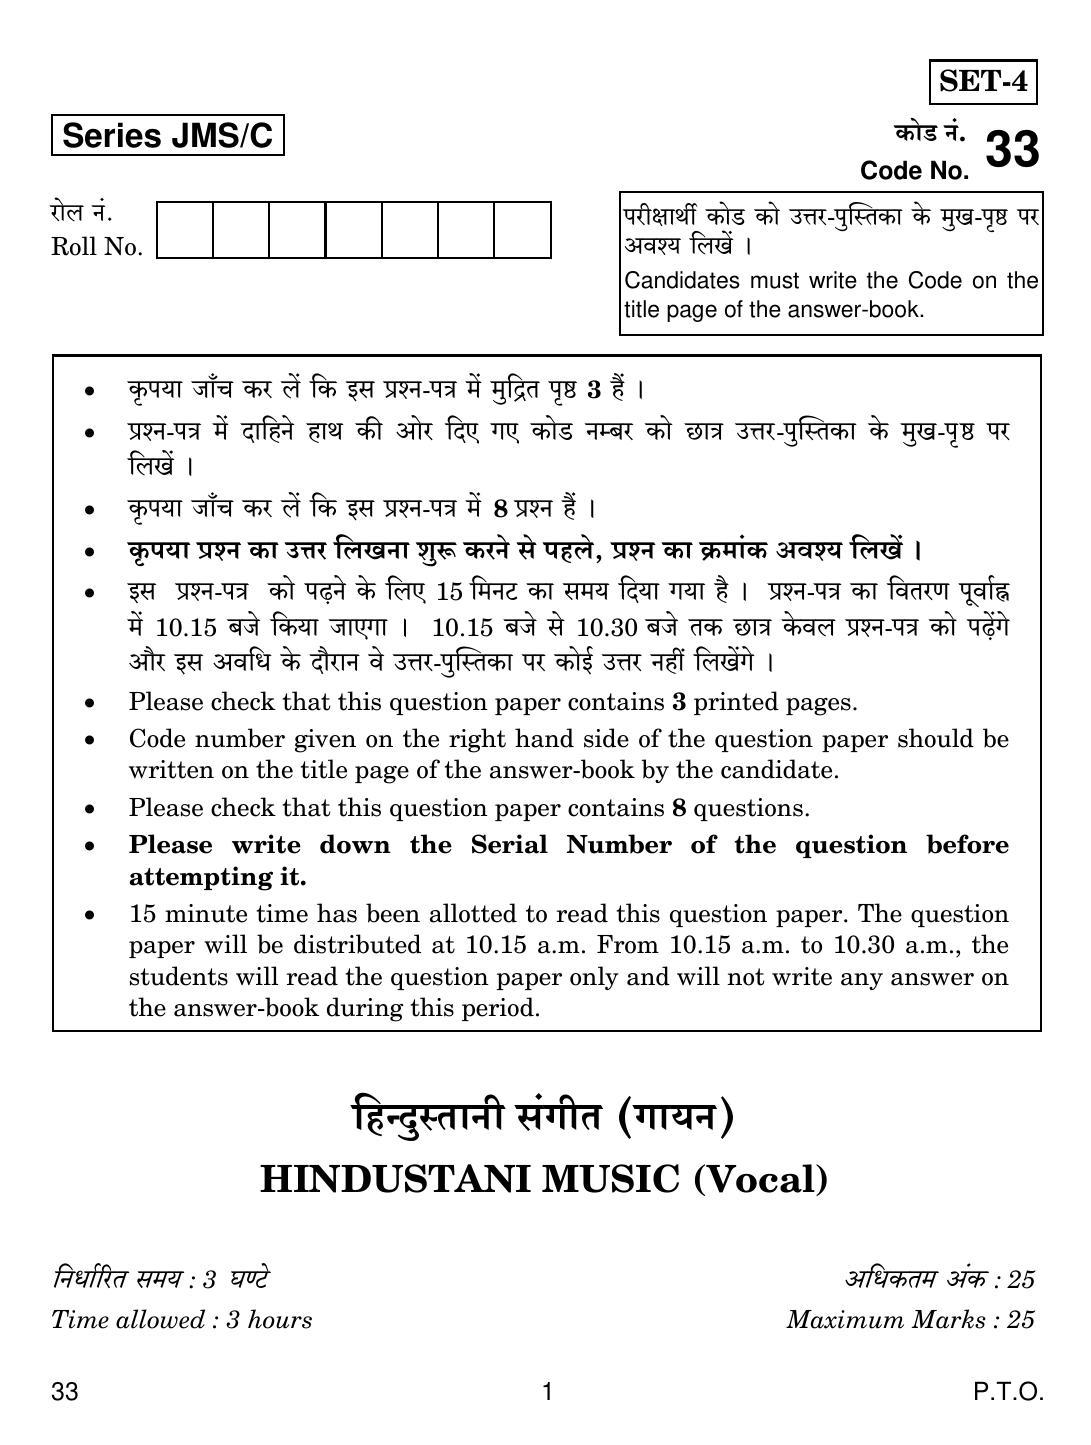 CBSE Class 10 33 HIND. MUSIC VOCAL 2019 Compartment Question Paper - Page 1